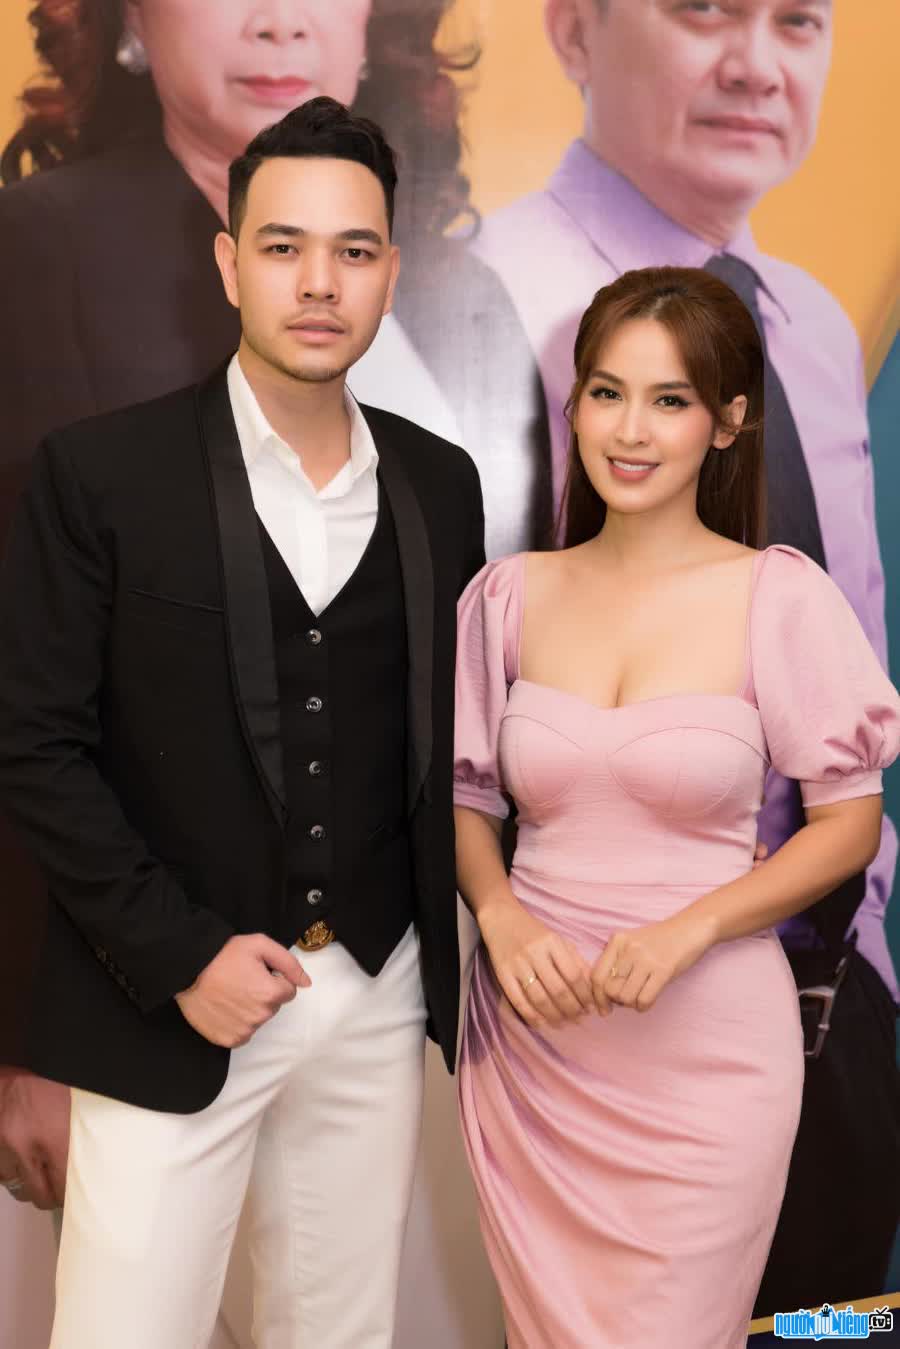 Picture of actor Hai Le and his co-star at a movie premiere